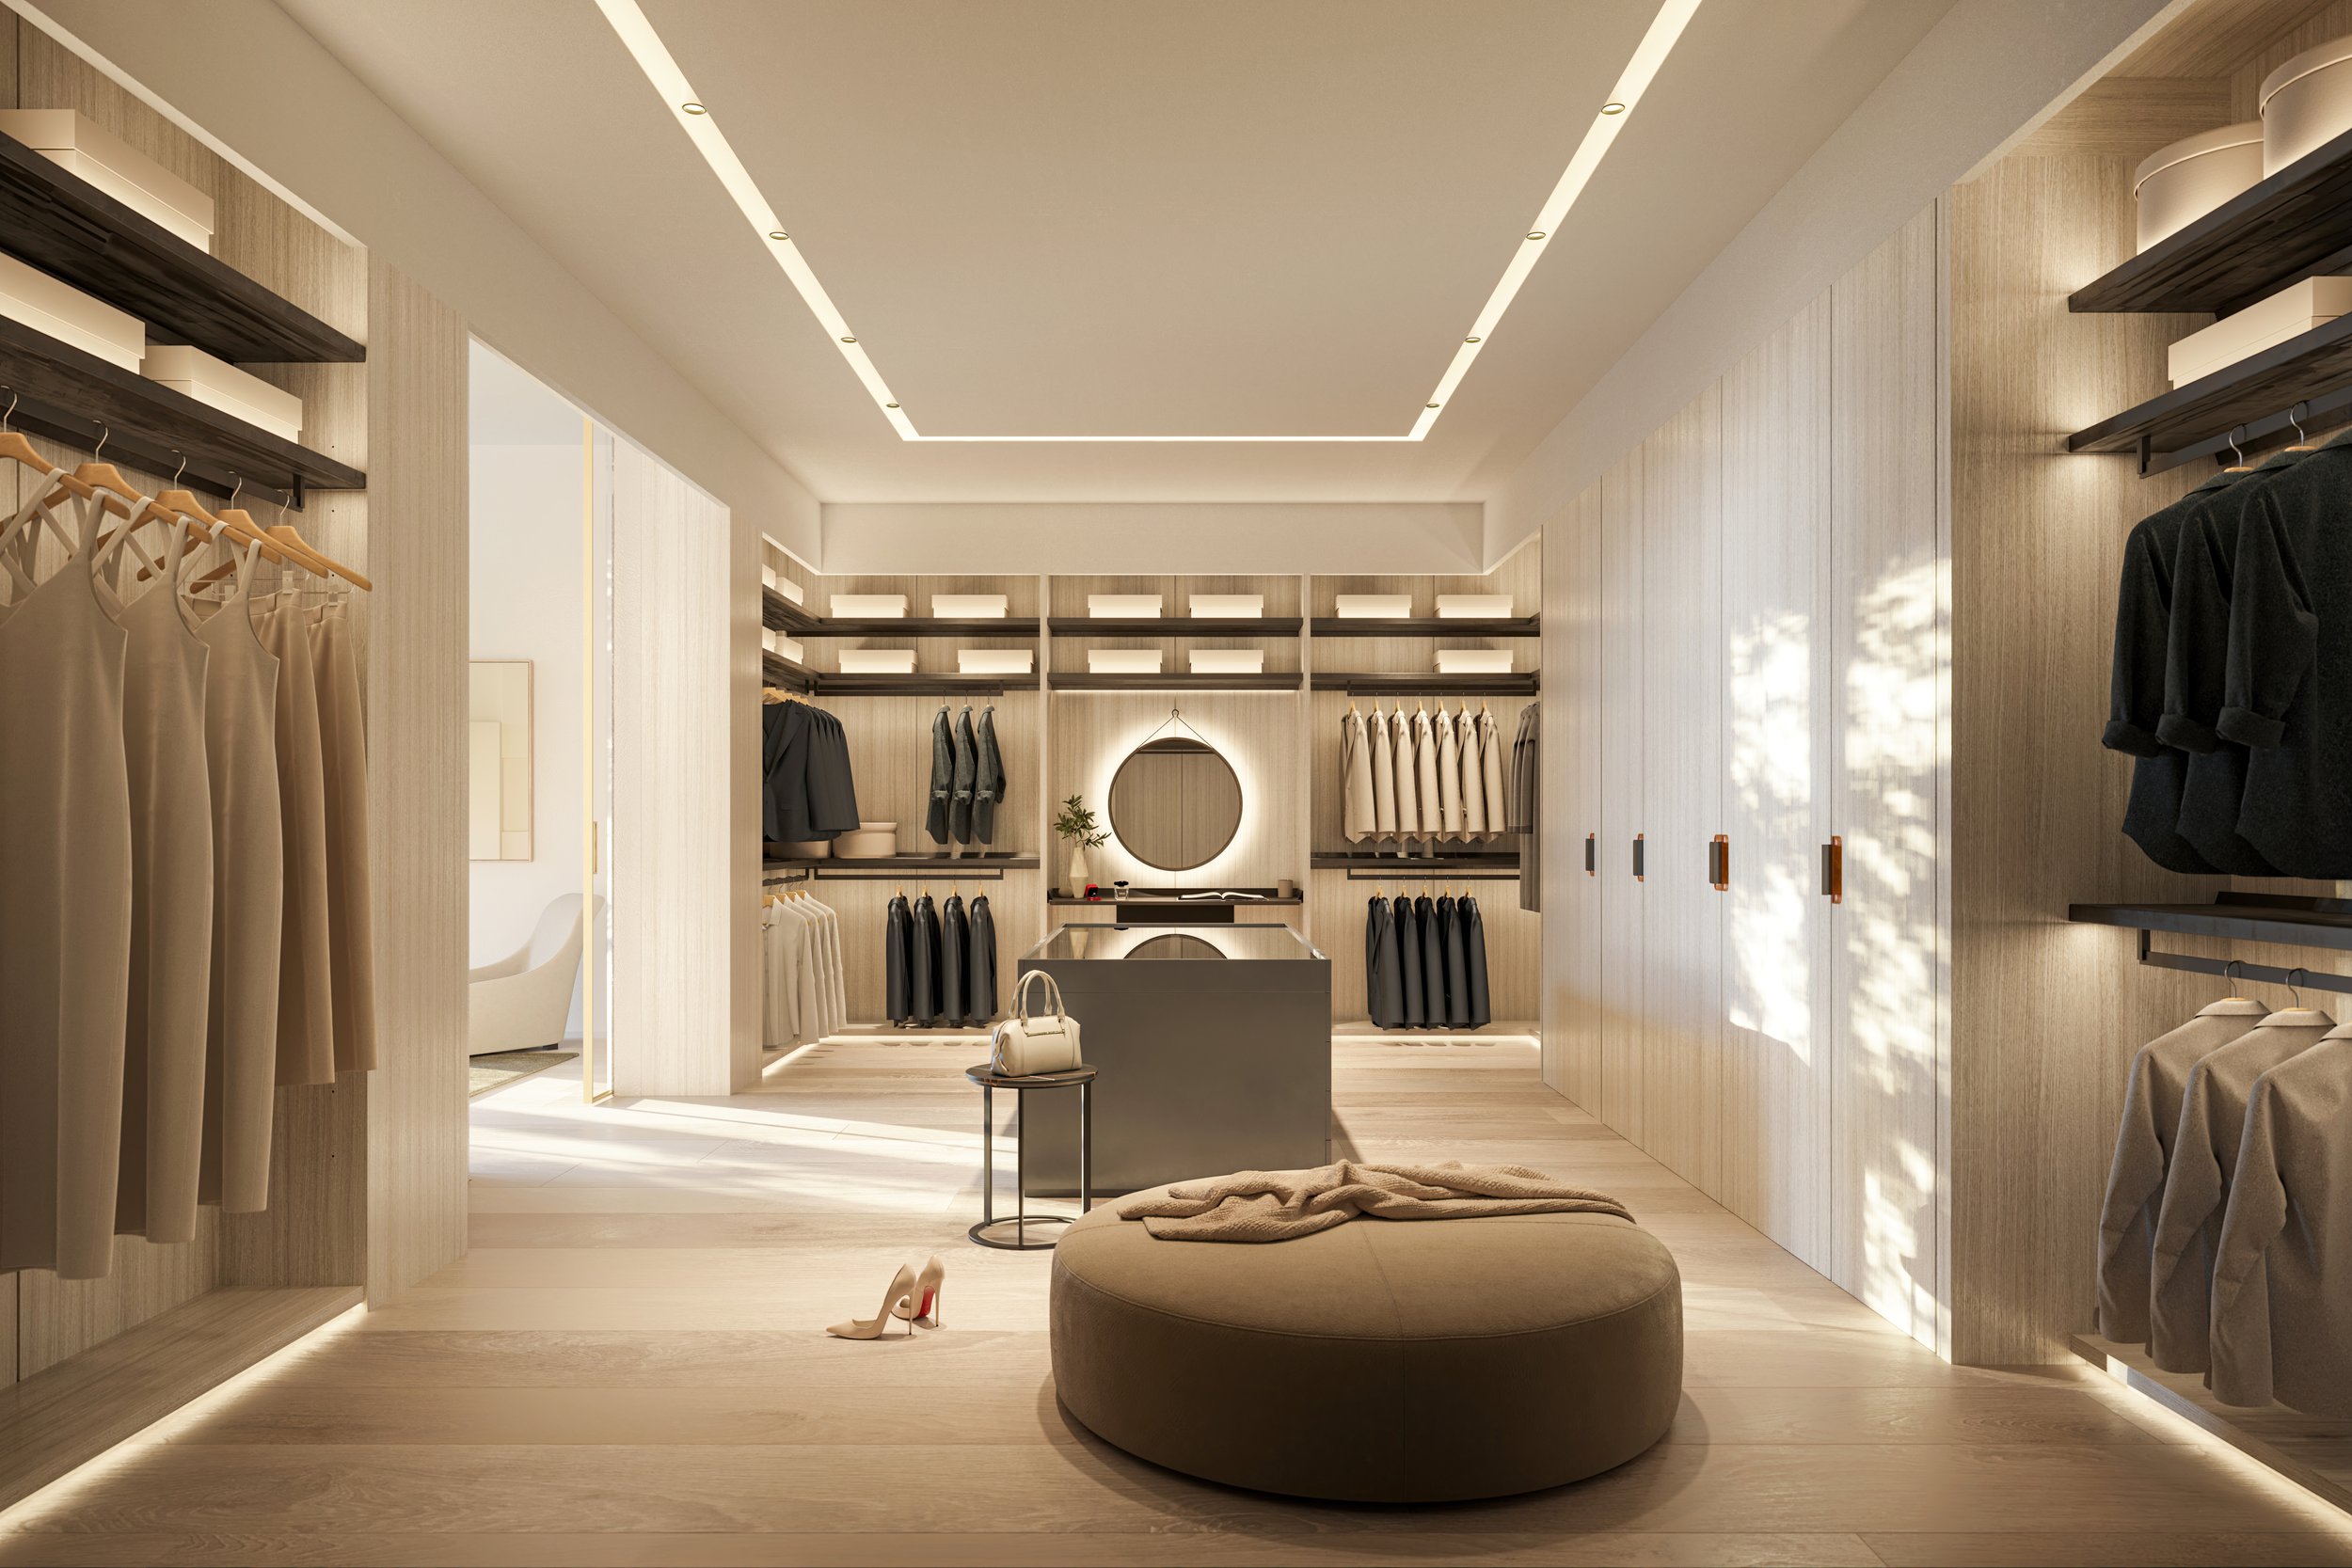 Walk in Closet at the Penthouse 1428 Brickell